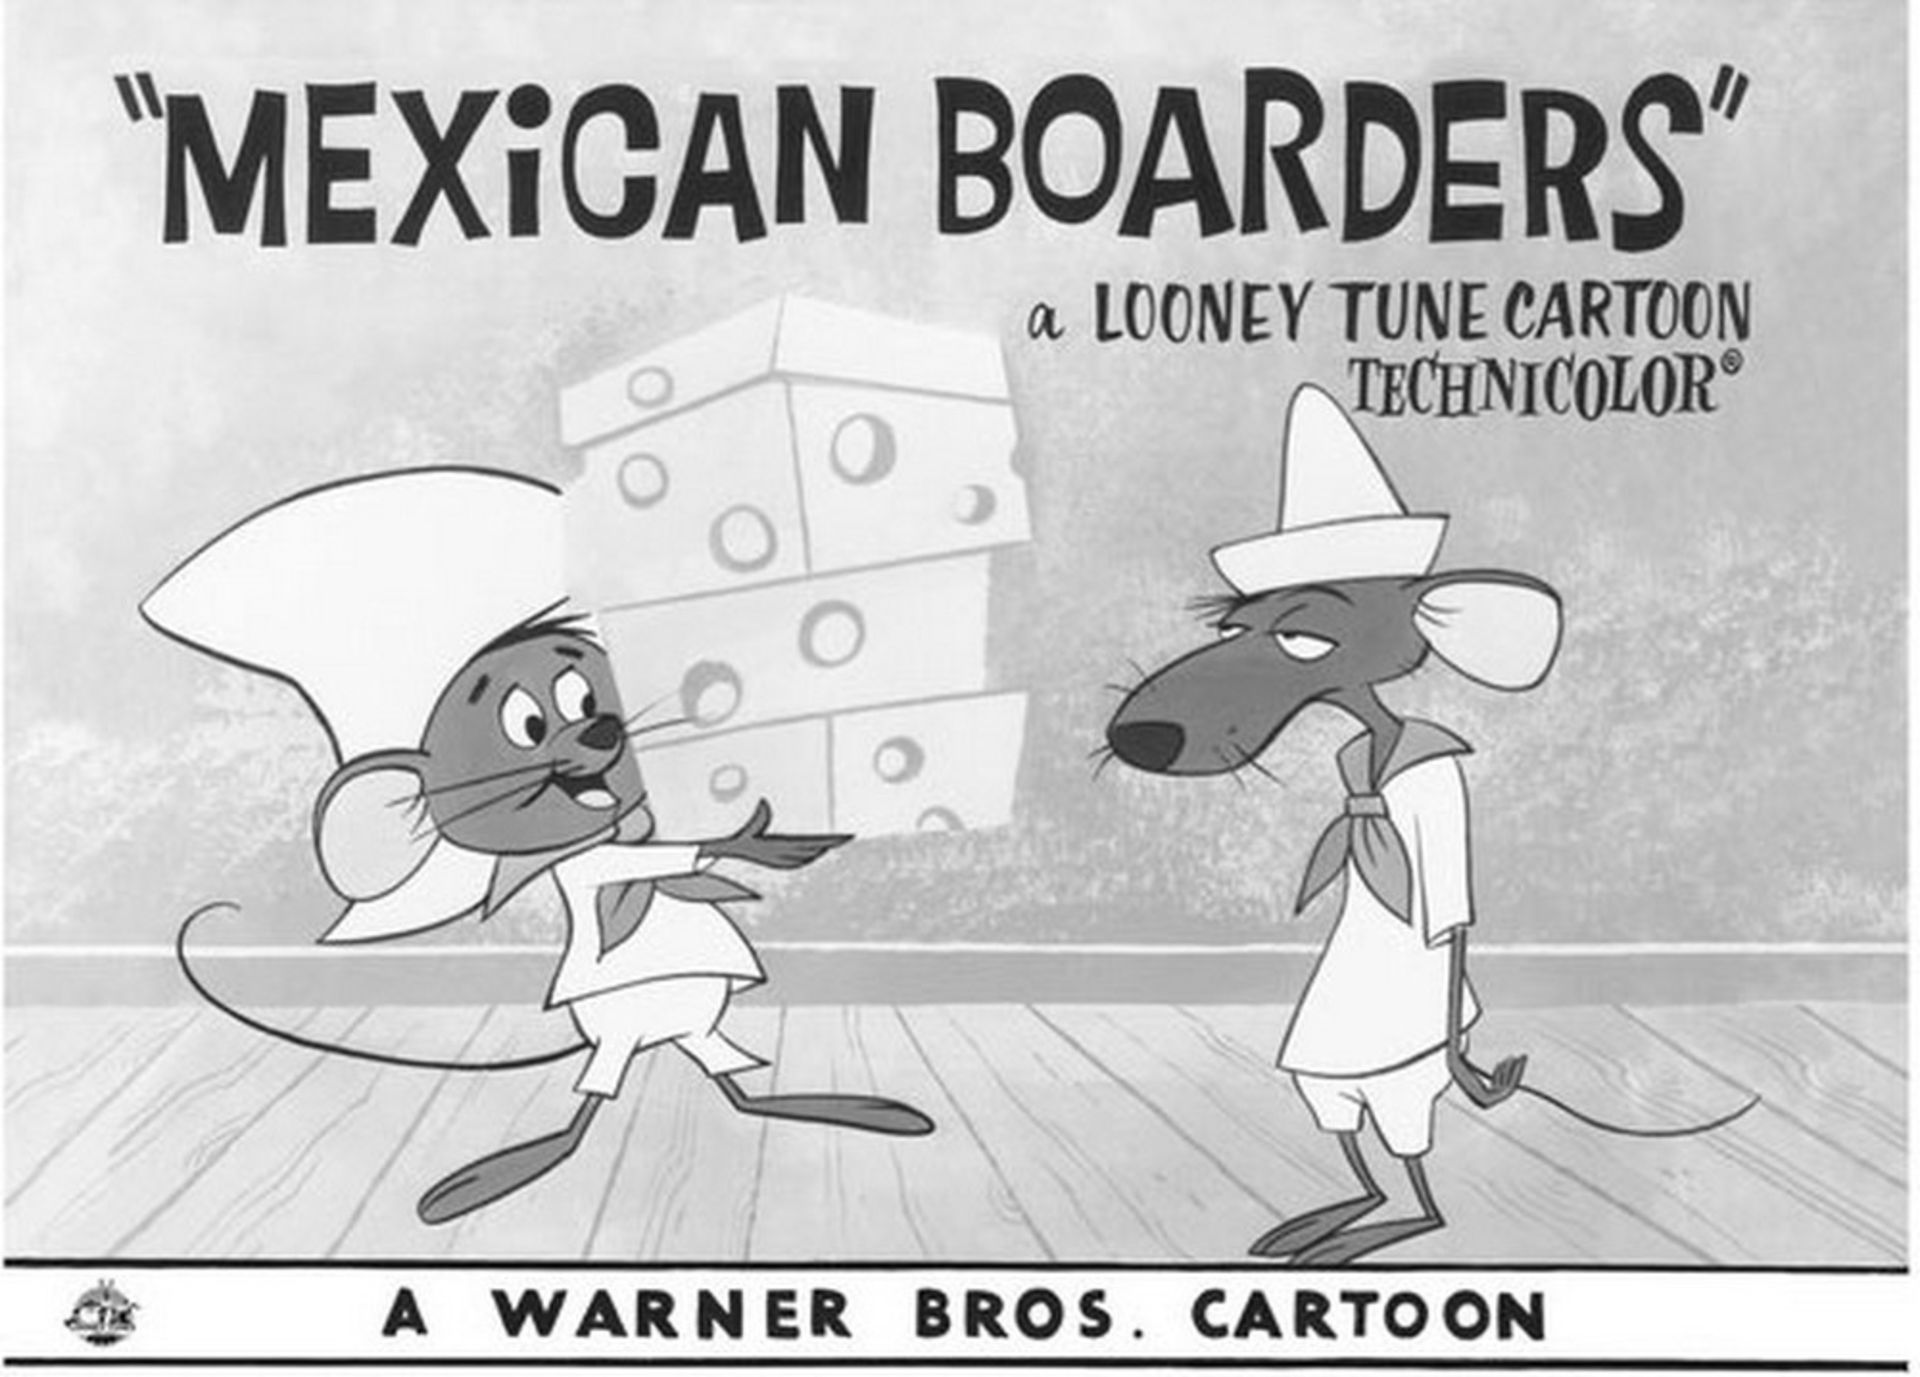 Warner Brothers Hologram Mexican Boarders - Image 2 of 2